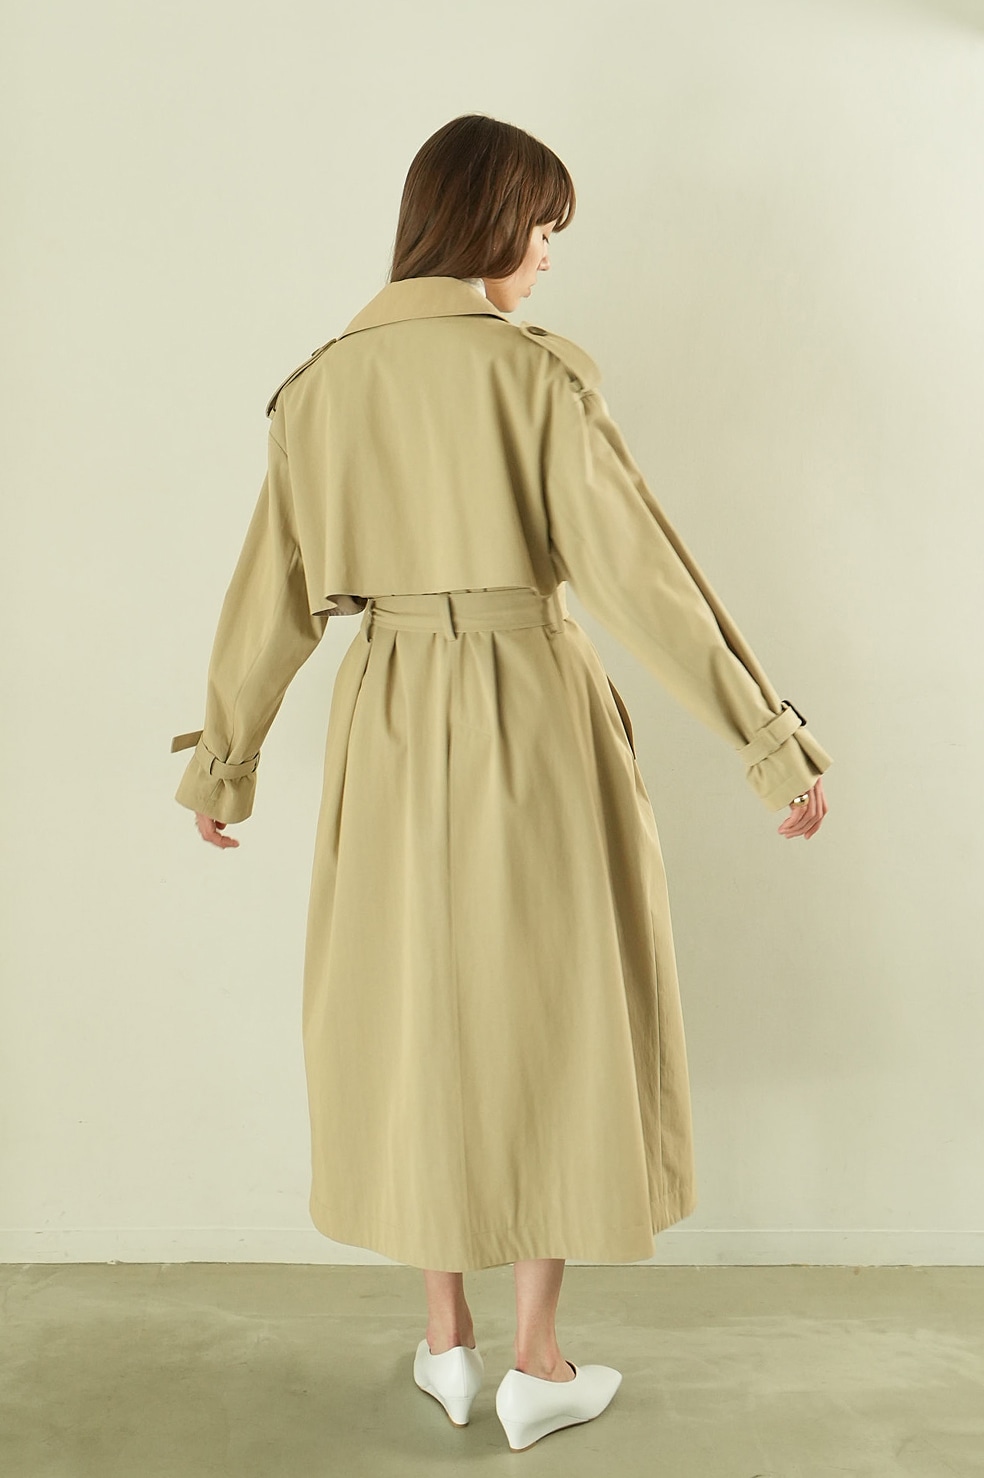 LAYER LONG TRENCH COAT｜OUTER(アウター)｜CLANE OFFICIAL ONLINE STORE